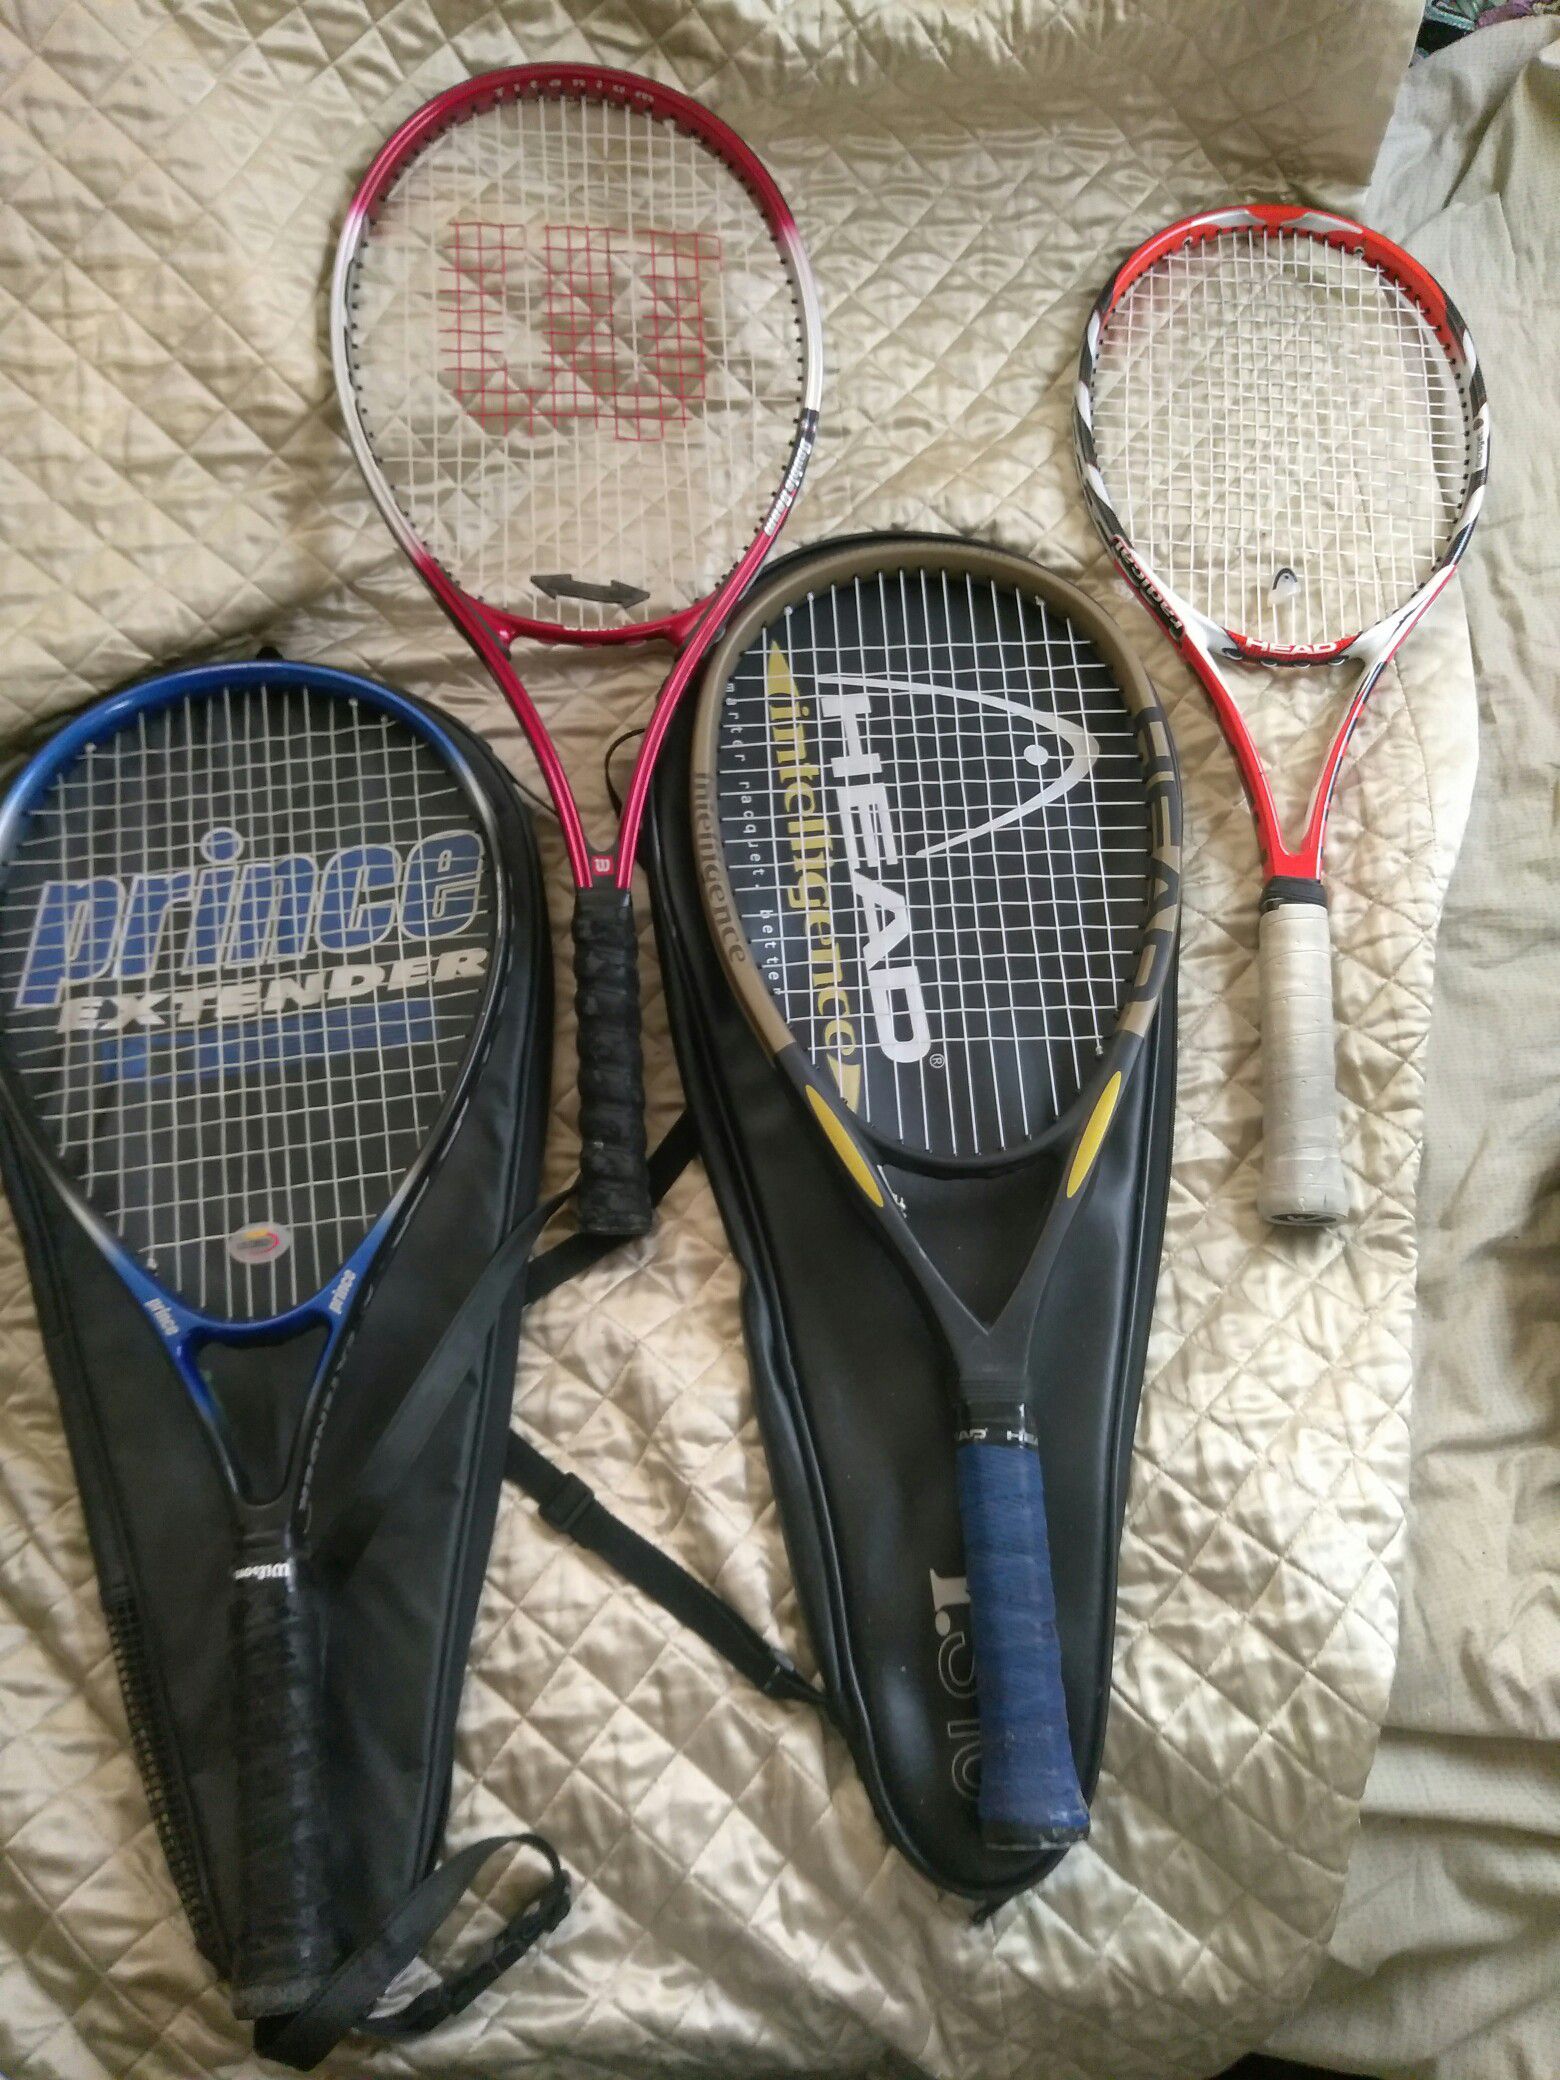 TENNIS RACKETS NICE EXPENSIVE ONES *READ DETAILS